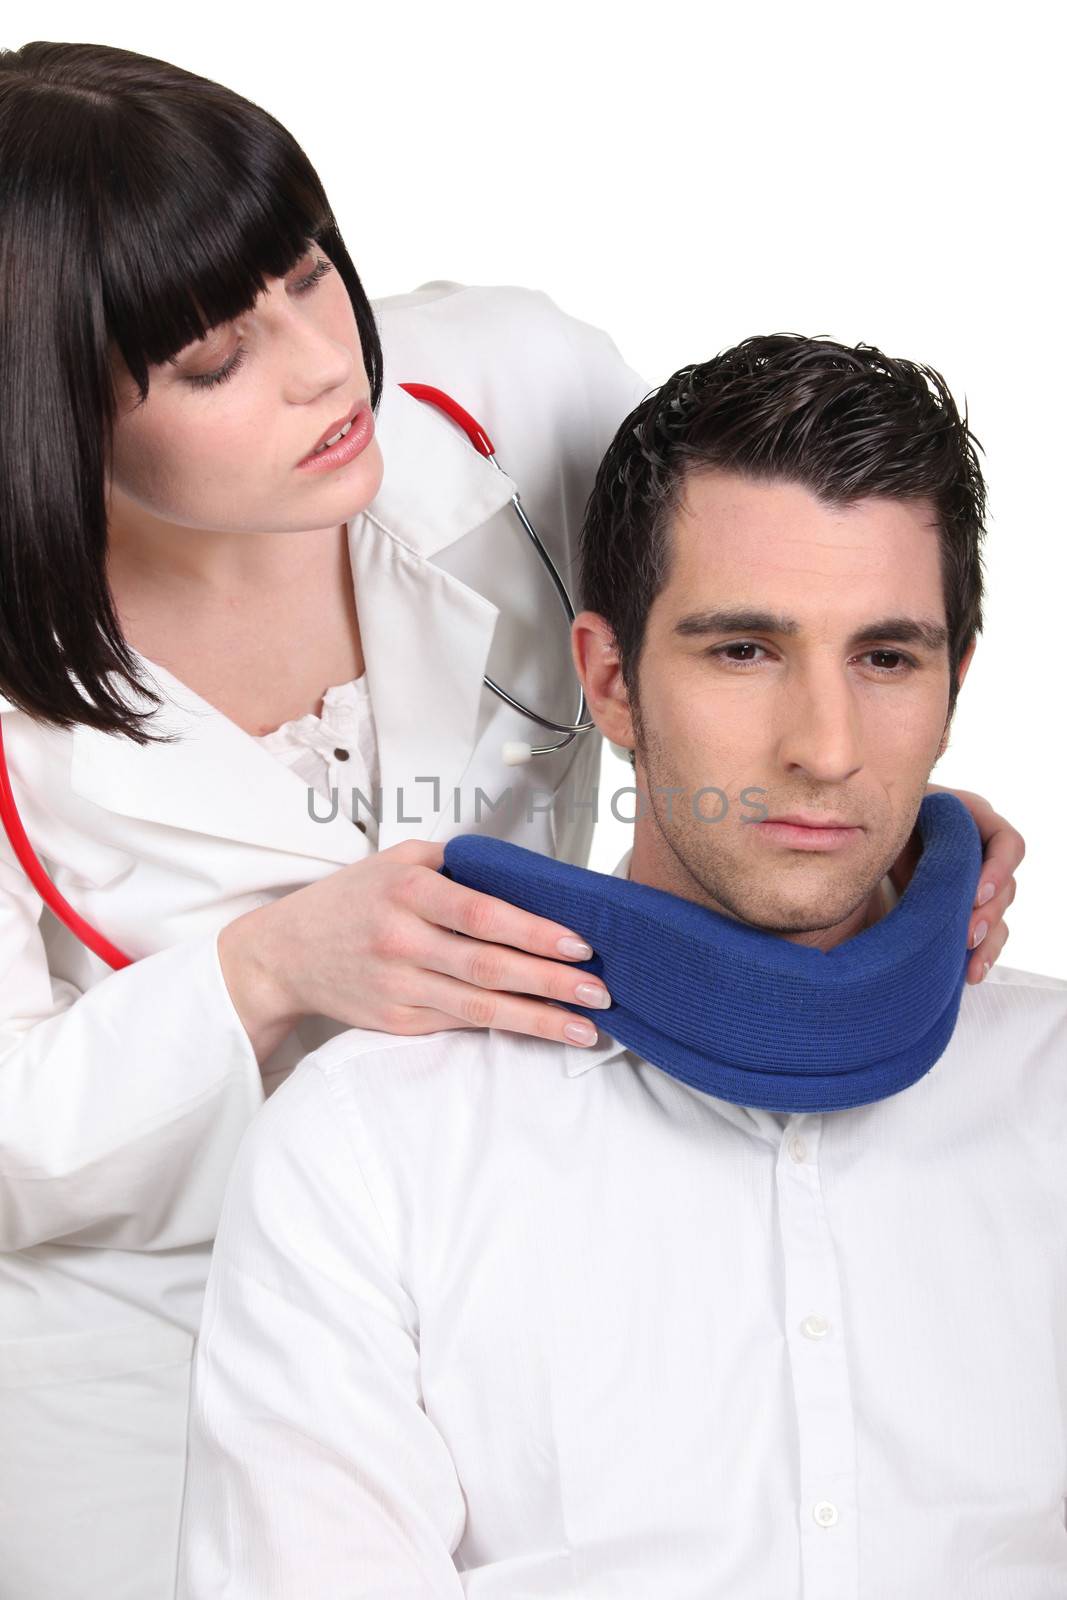 Doctor putting a neck brace on her patient by phovoir